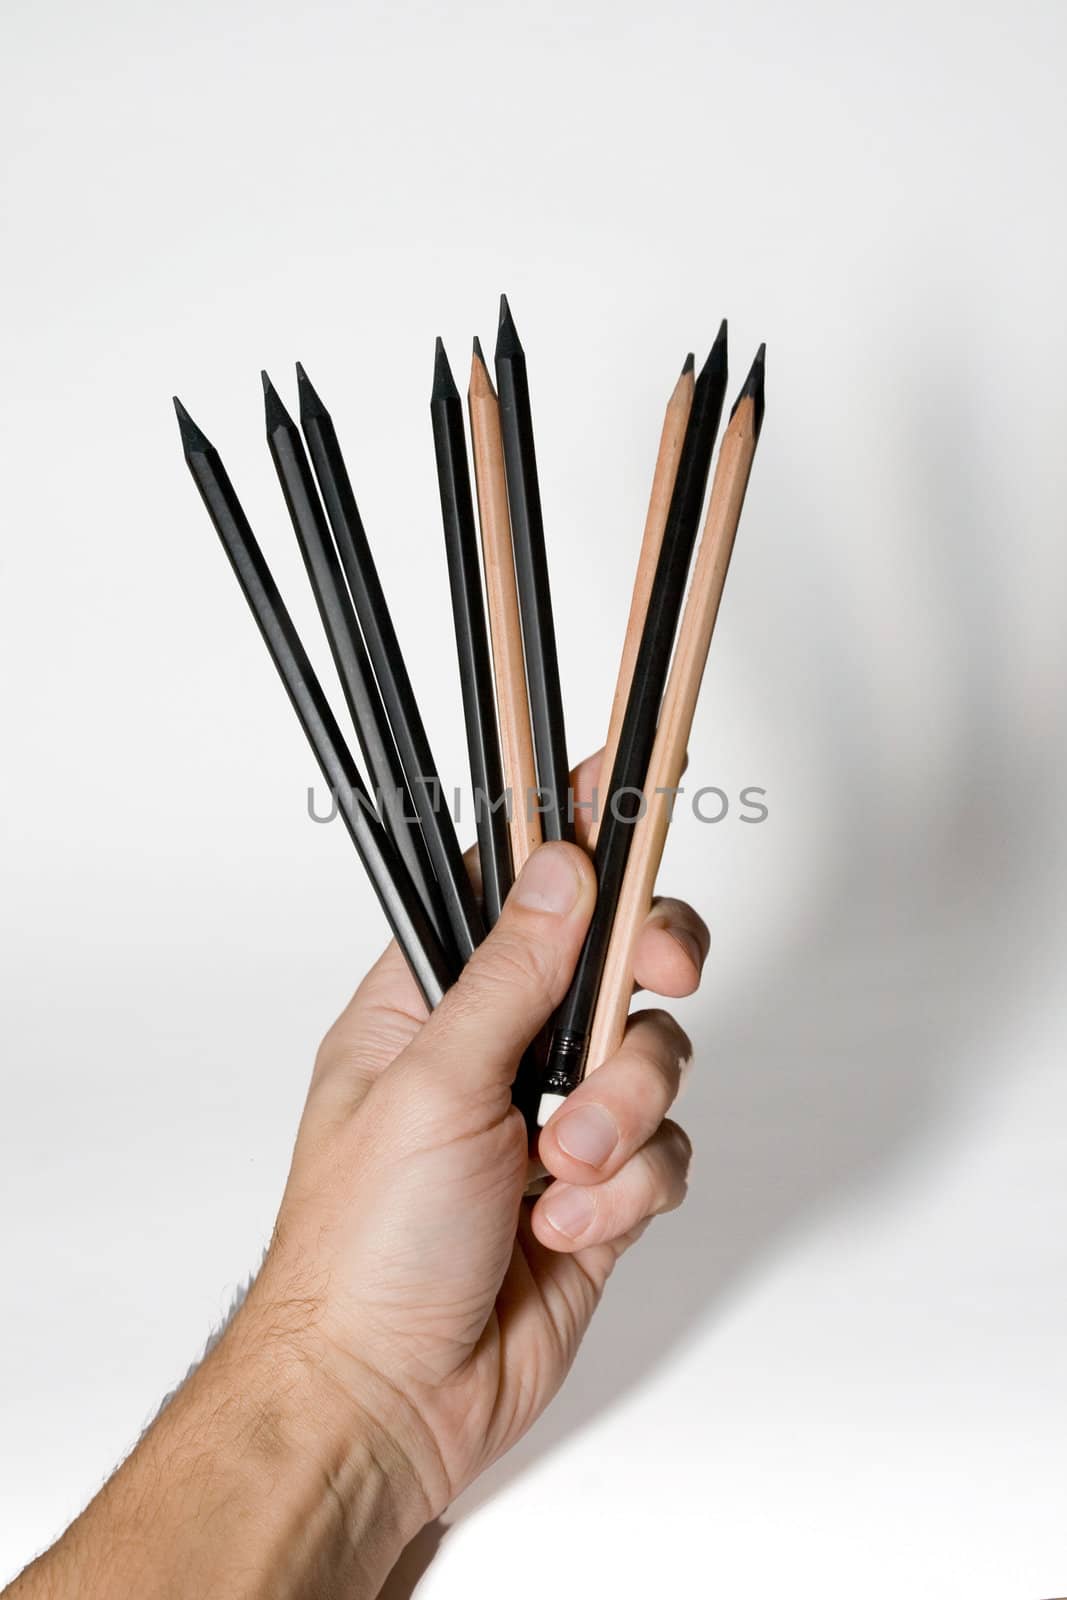 Pencils in a hand on a white background